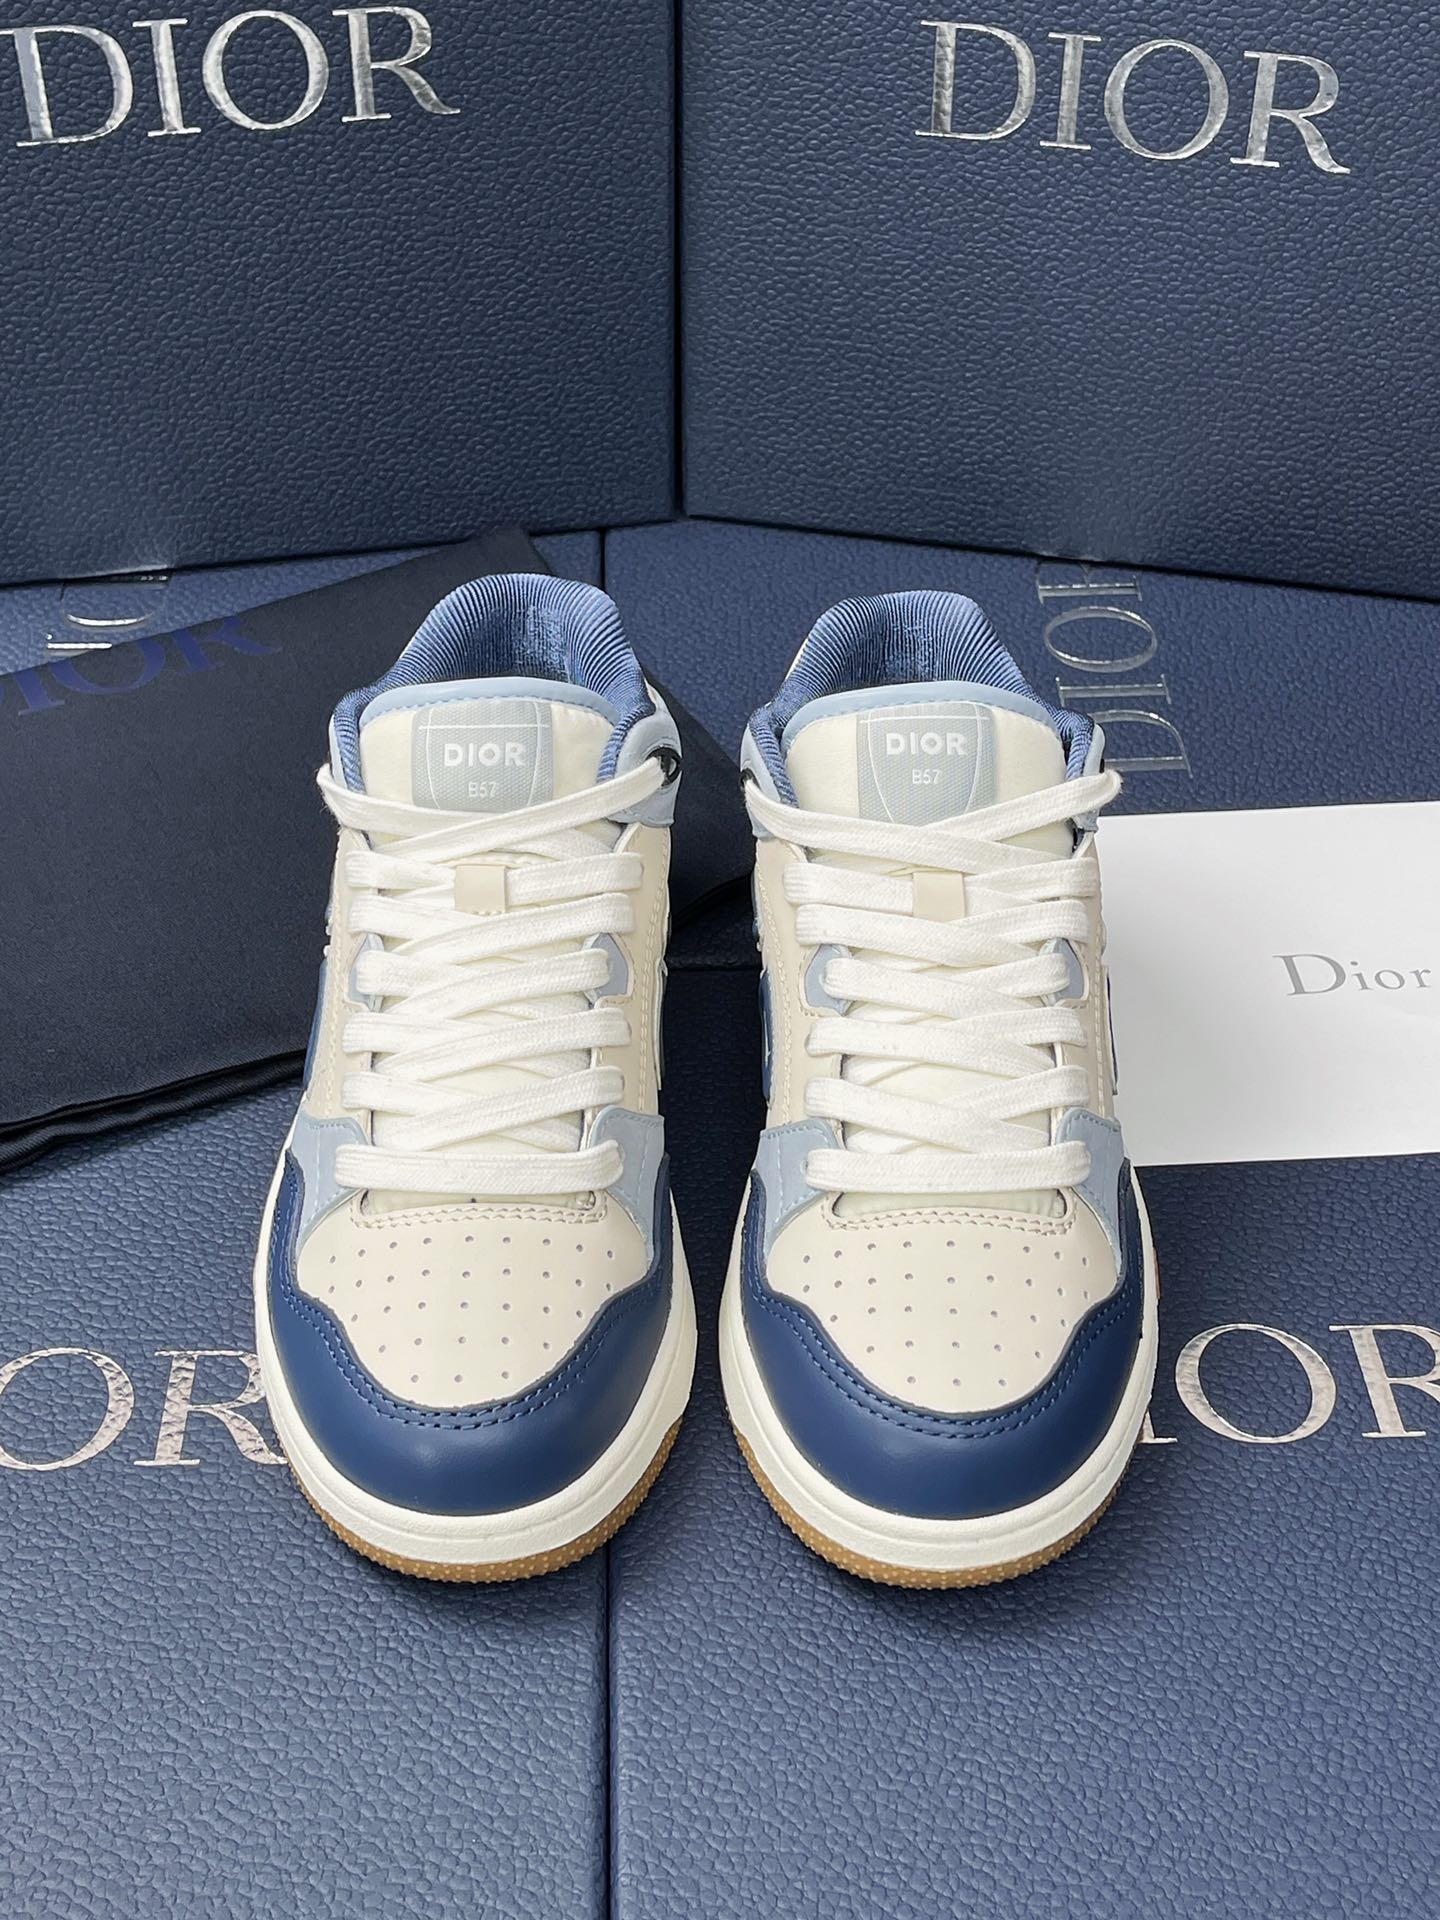 Dior Shoes Sneakers TPU Vintage Casual